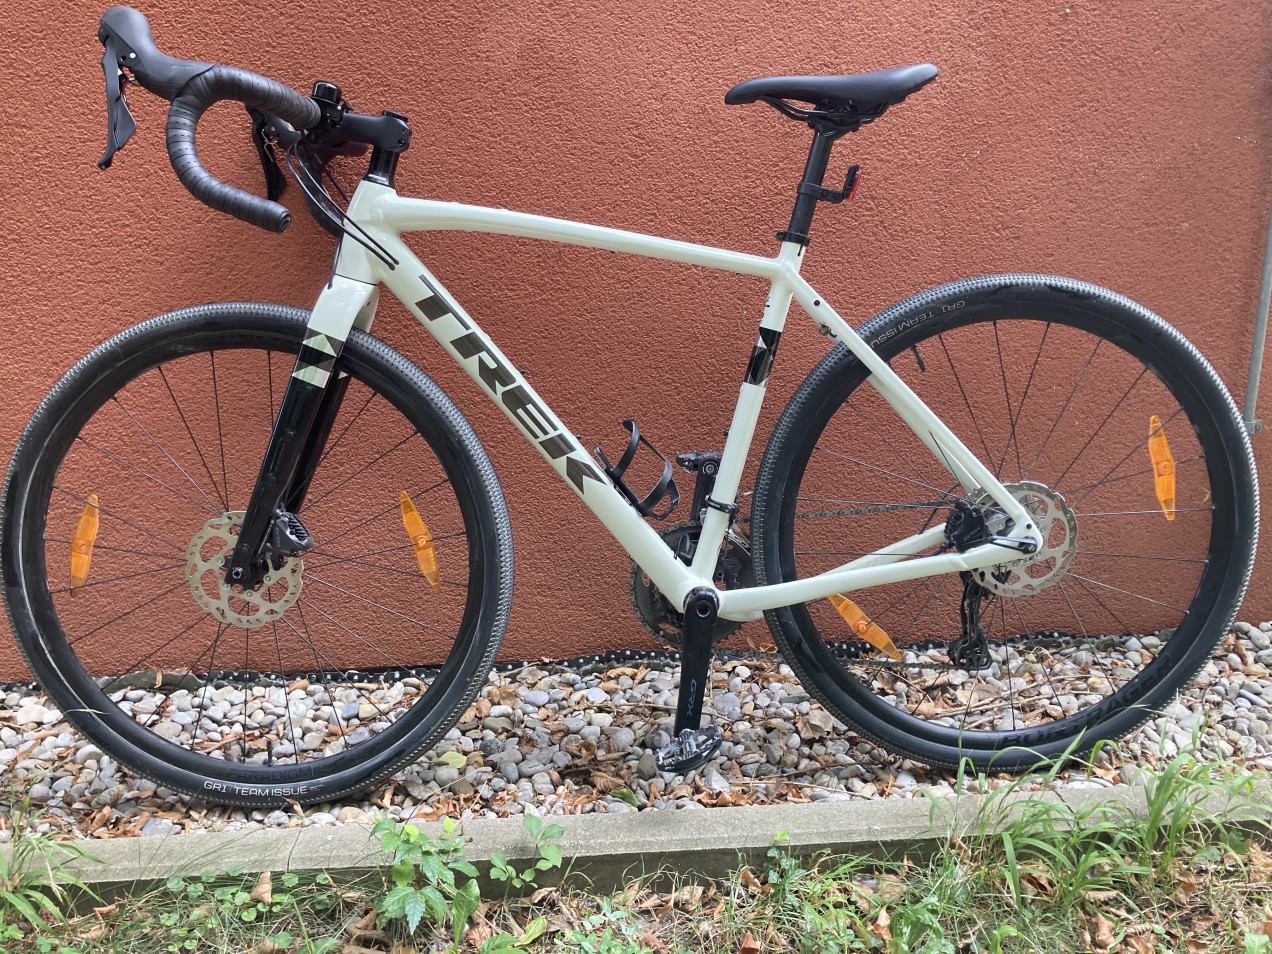 Trek Checkpoint ALR 5 used in 54 cm buycycle